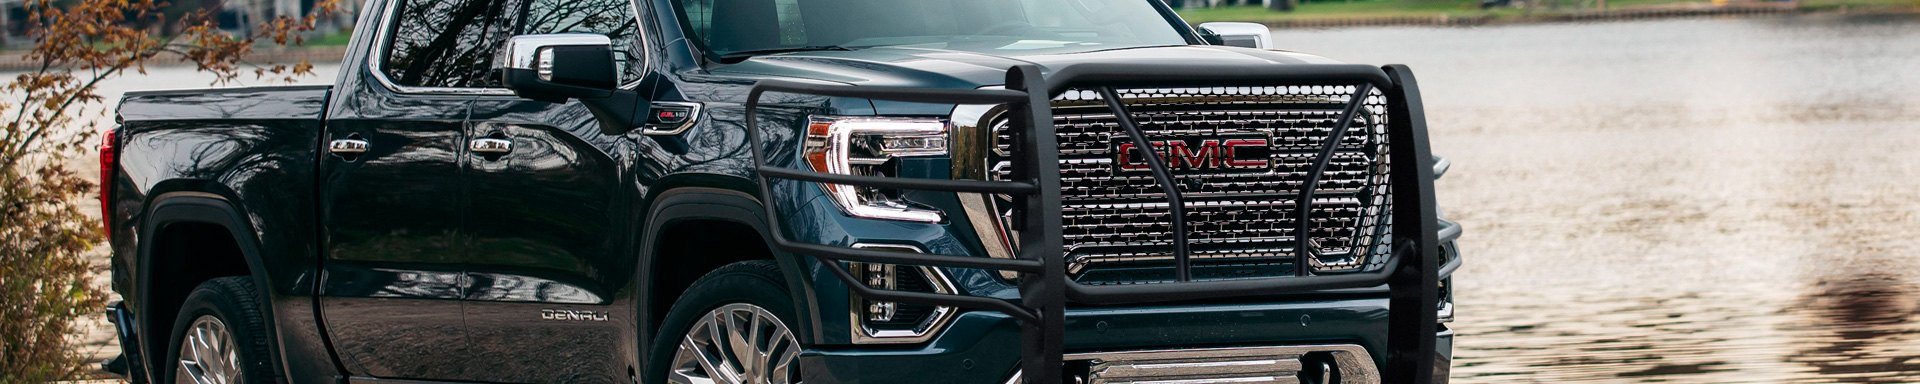 SteelCraft’s Tried & Tested Grille Guards Are Now Available for 2020 GMC Sierra HD